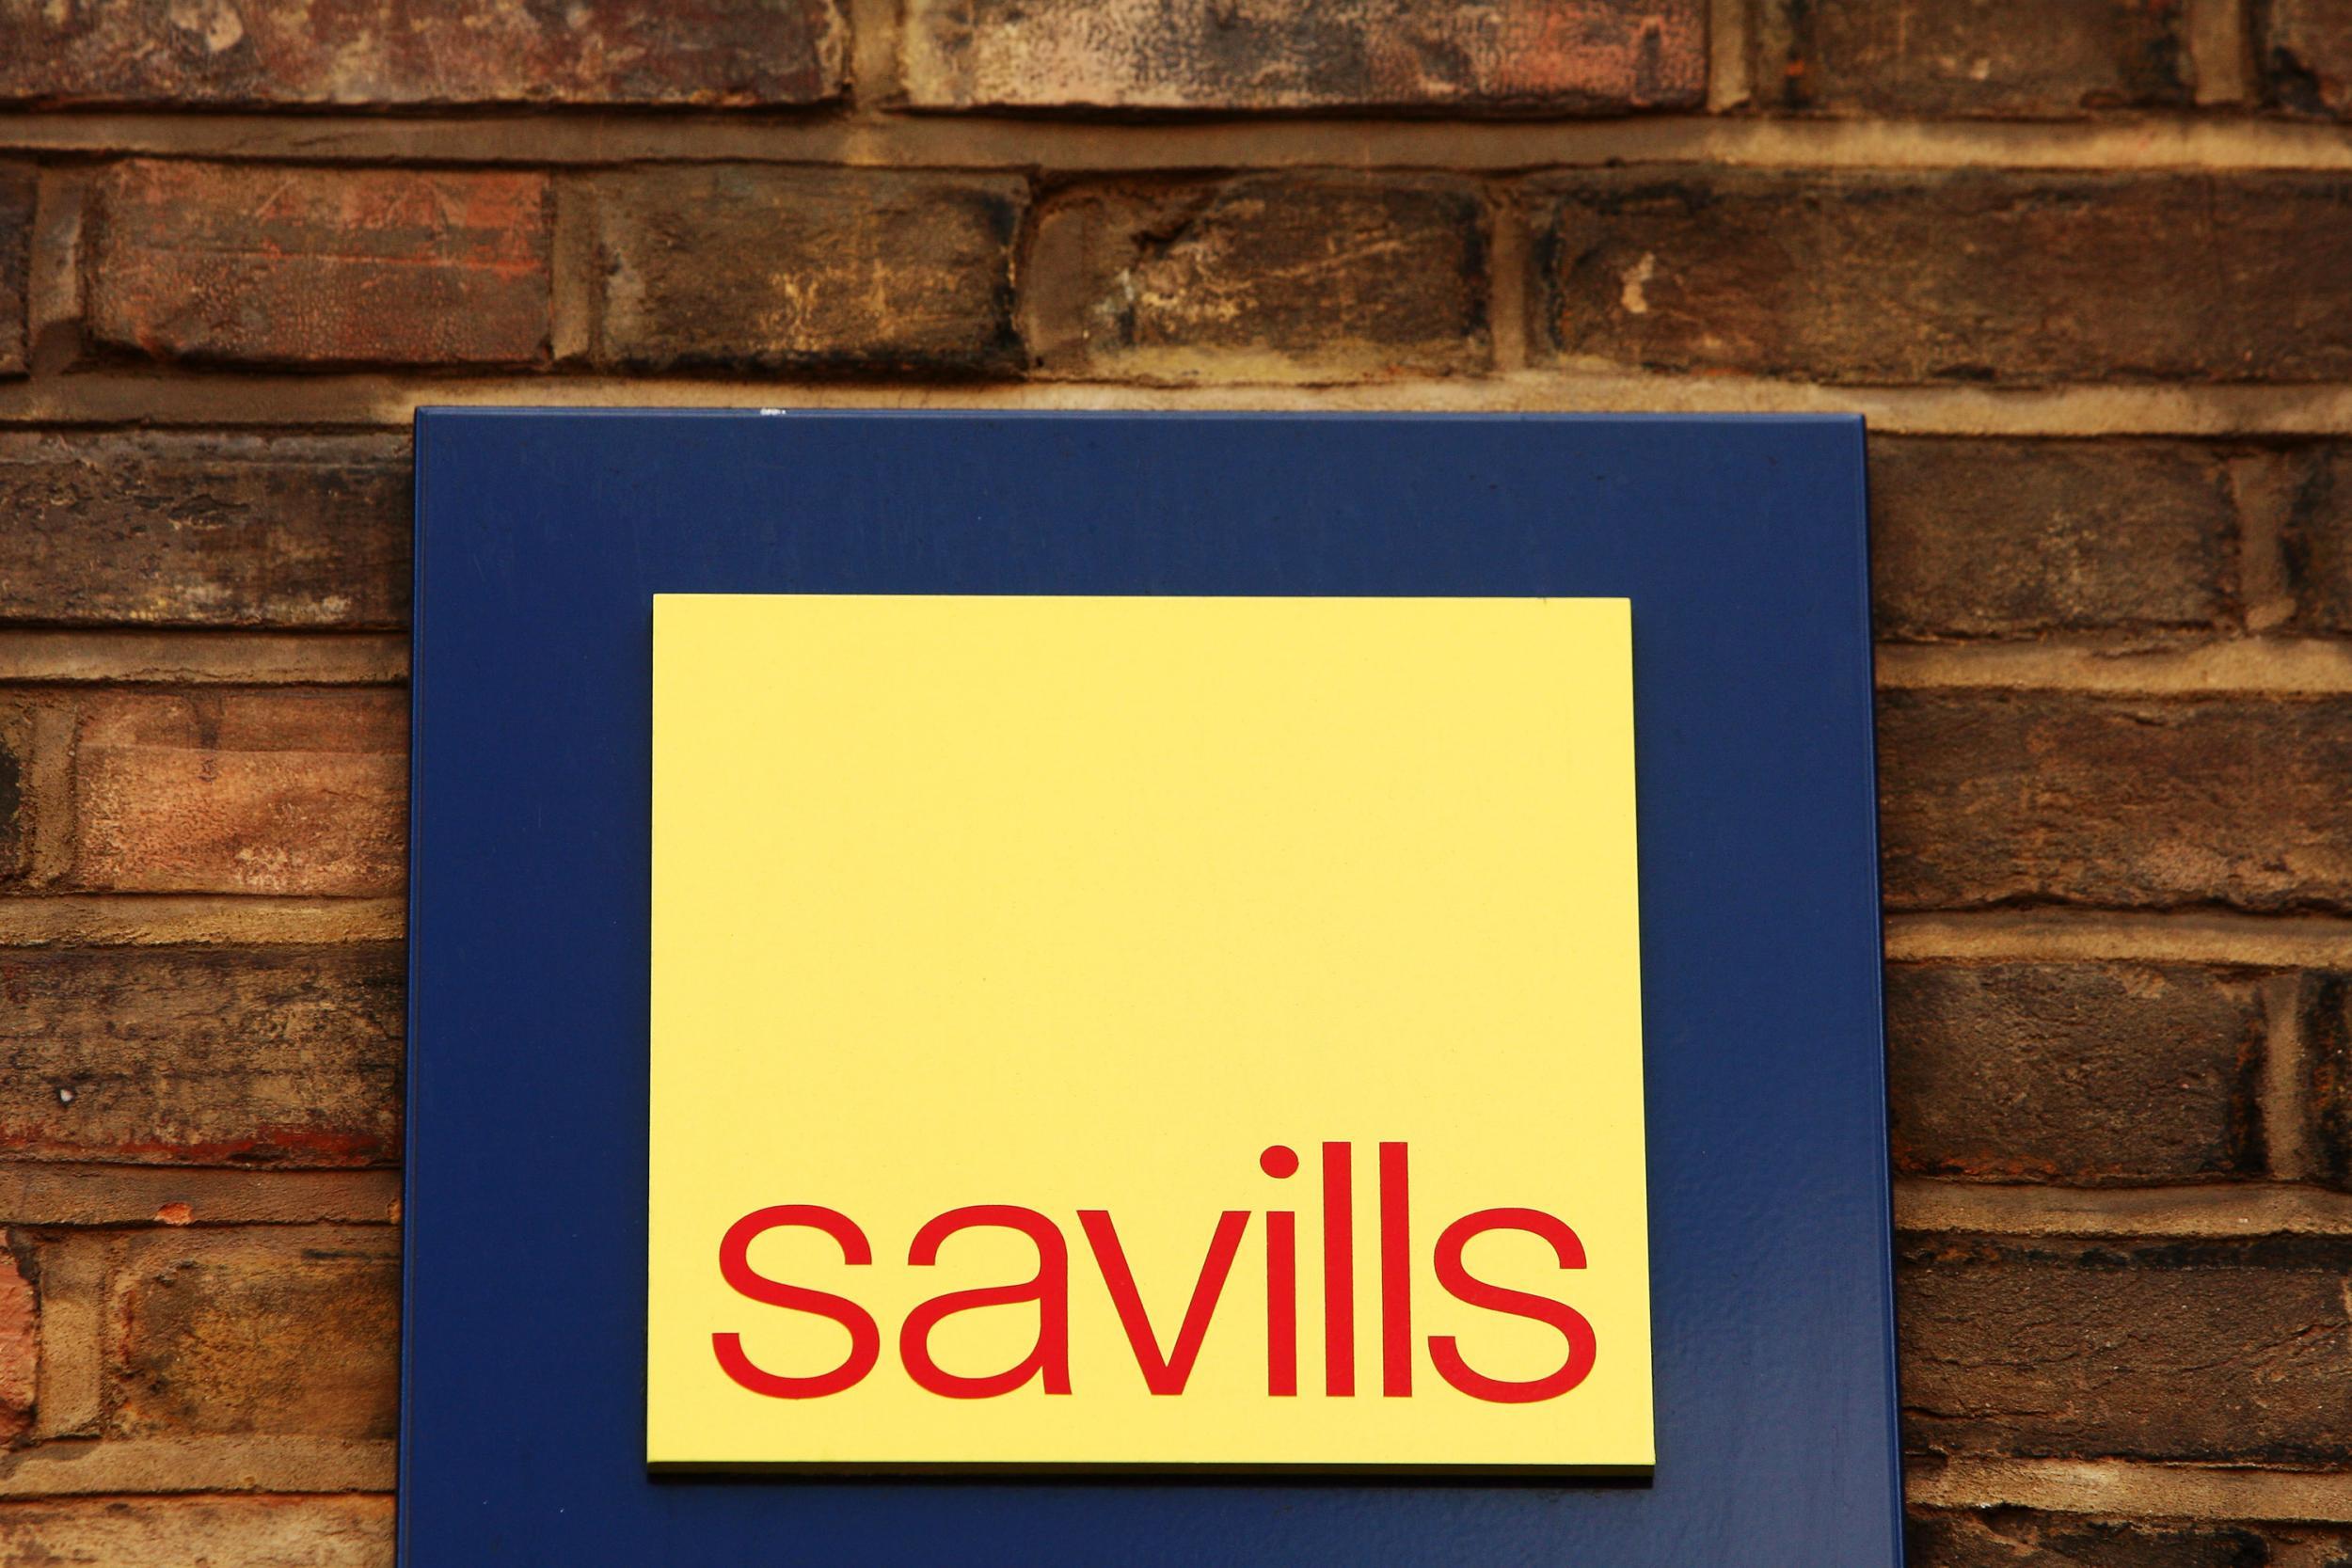 Savills reported a 3.5 per cent increase in underlying profit for the year to the end of December